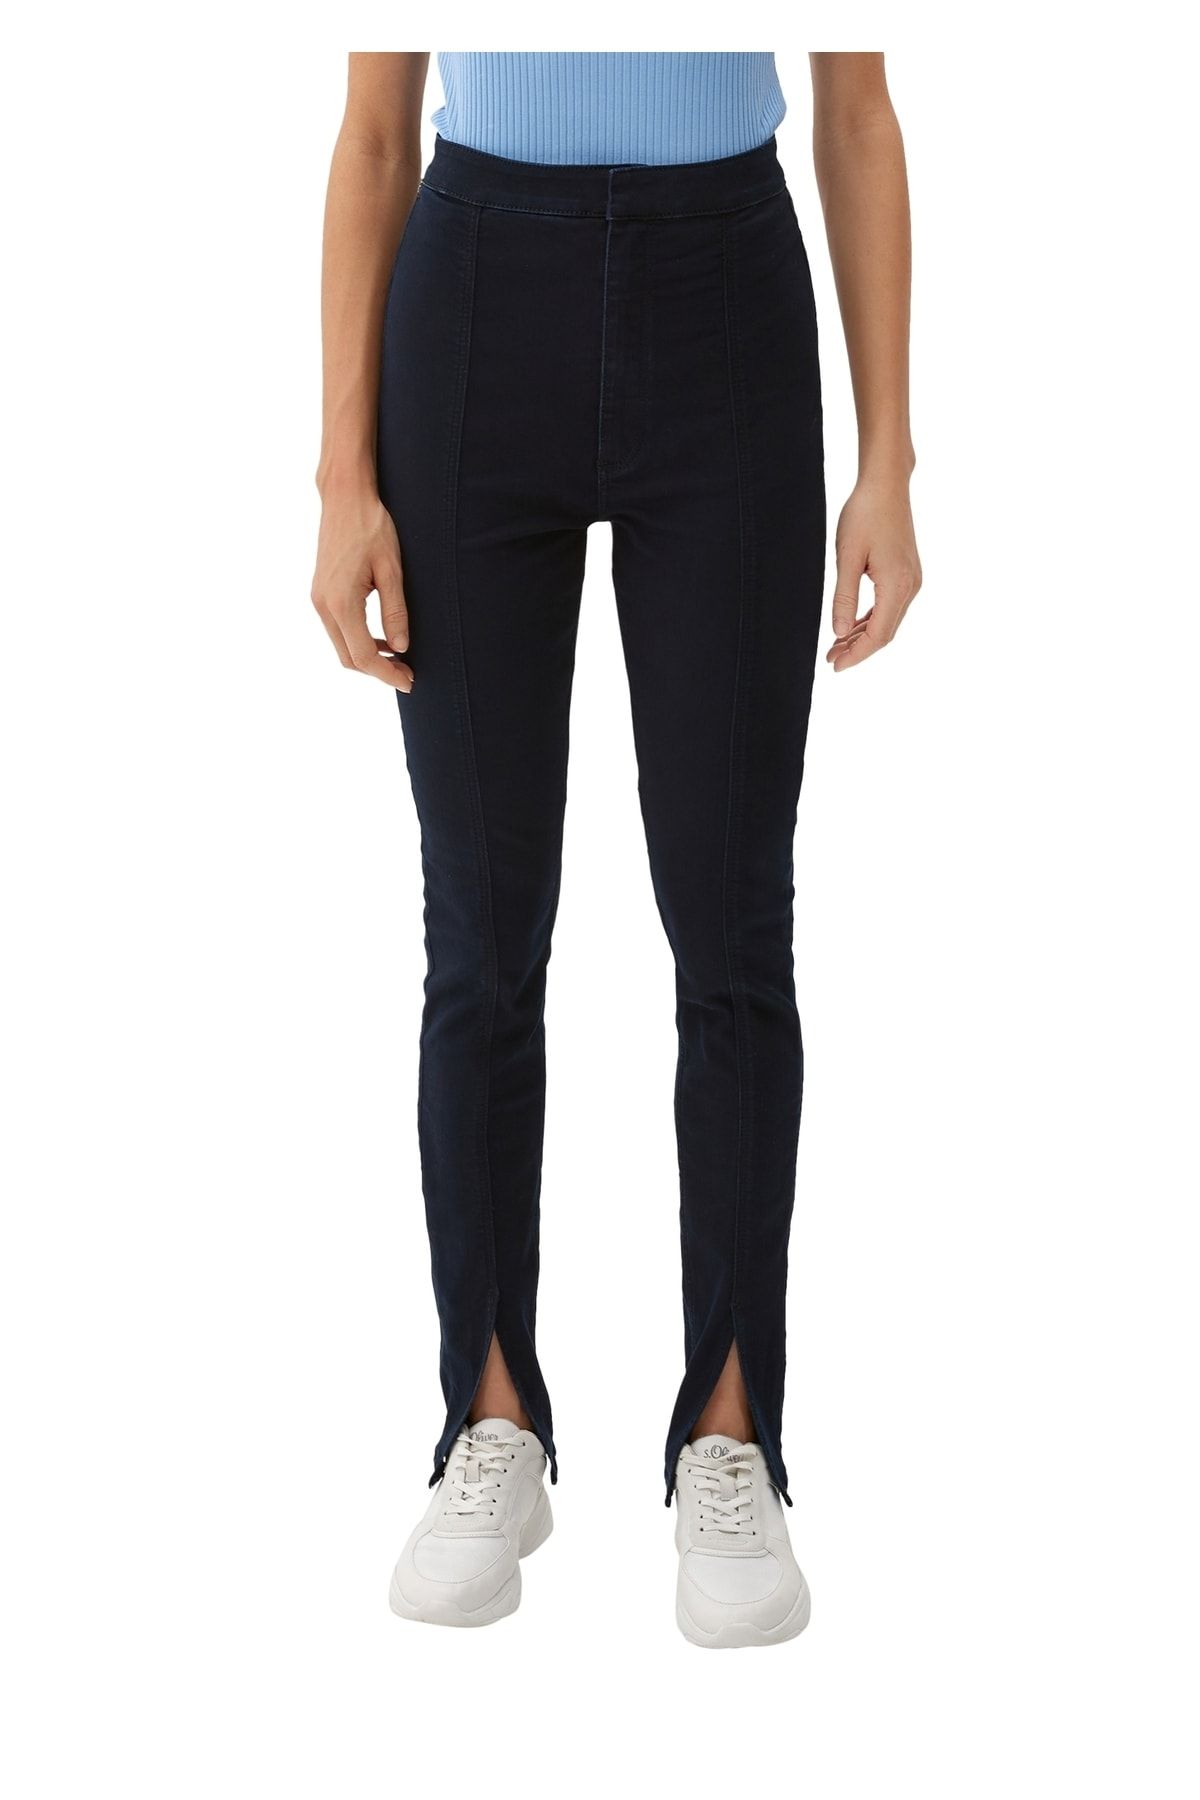 QS by s.Oliver Jeans - Trendyol Schwarz - Bootcut 